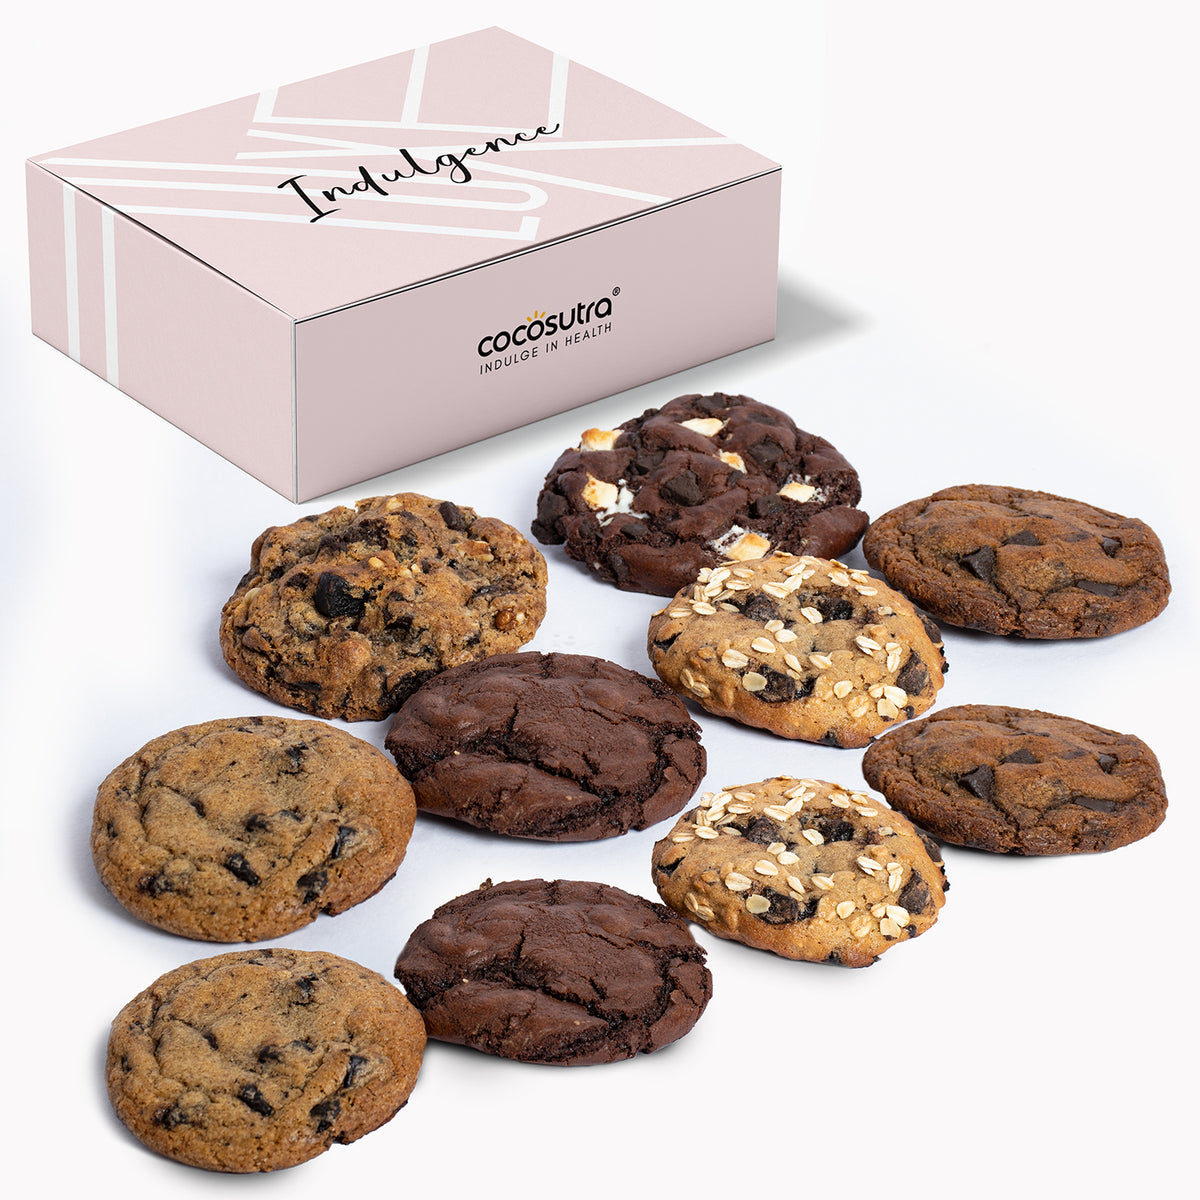 Build Your Own Box | 6 to 12 Gourmet Cookies | Freshly Baked Ooey Gooey Cookies for Gifting